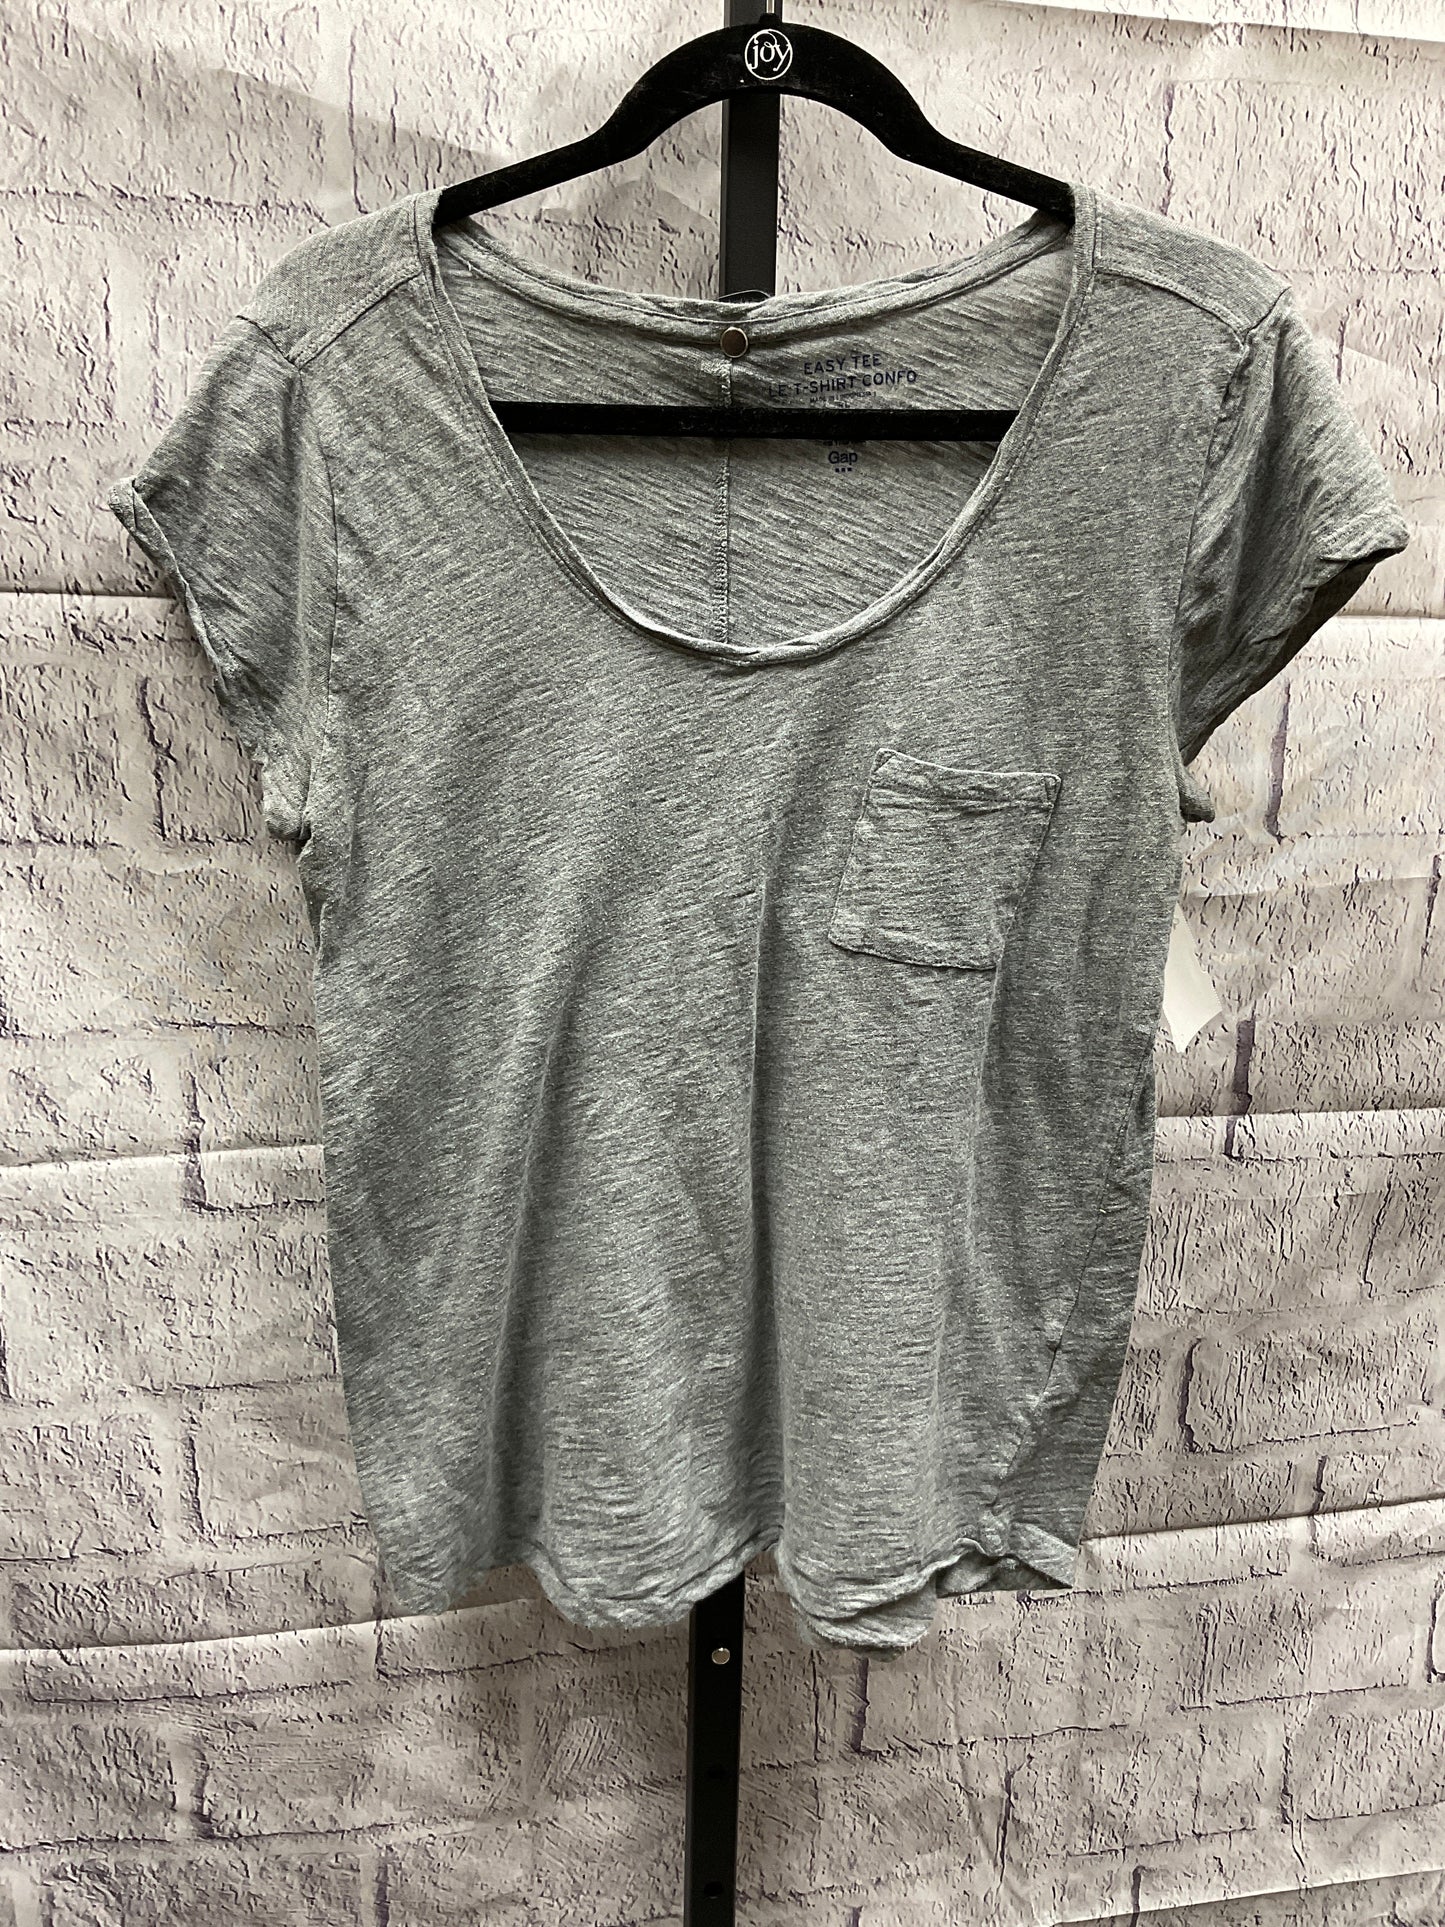 Top Short Sleeve Basic By Gap  Size: L